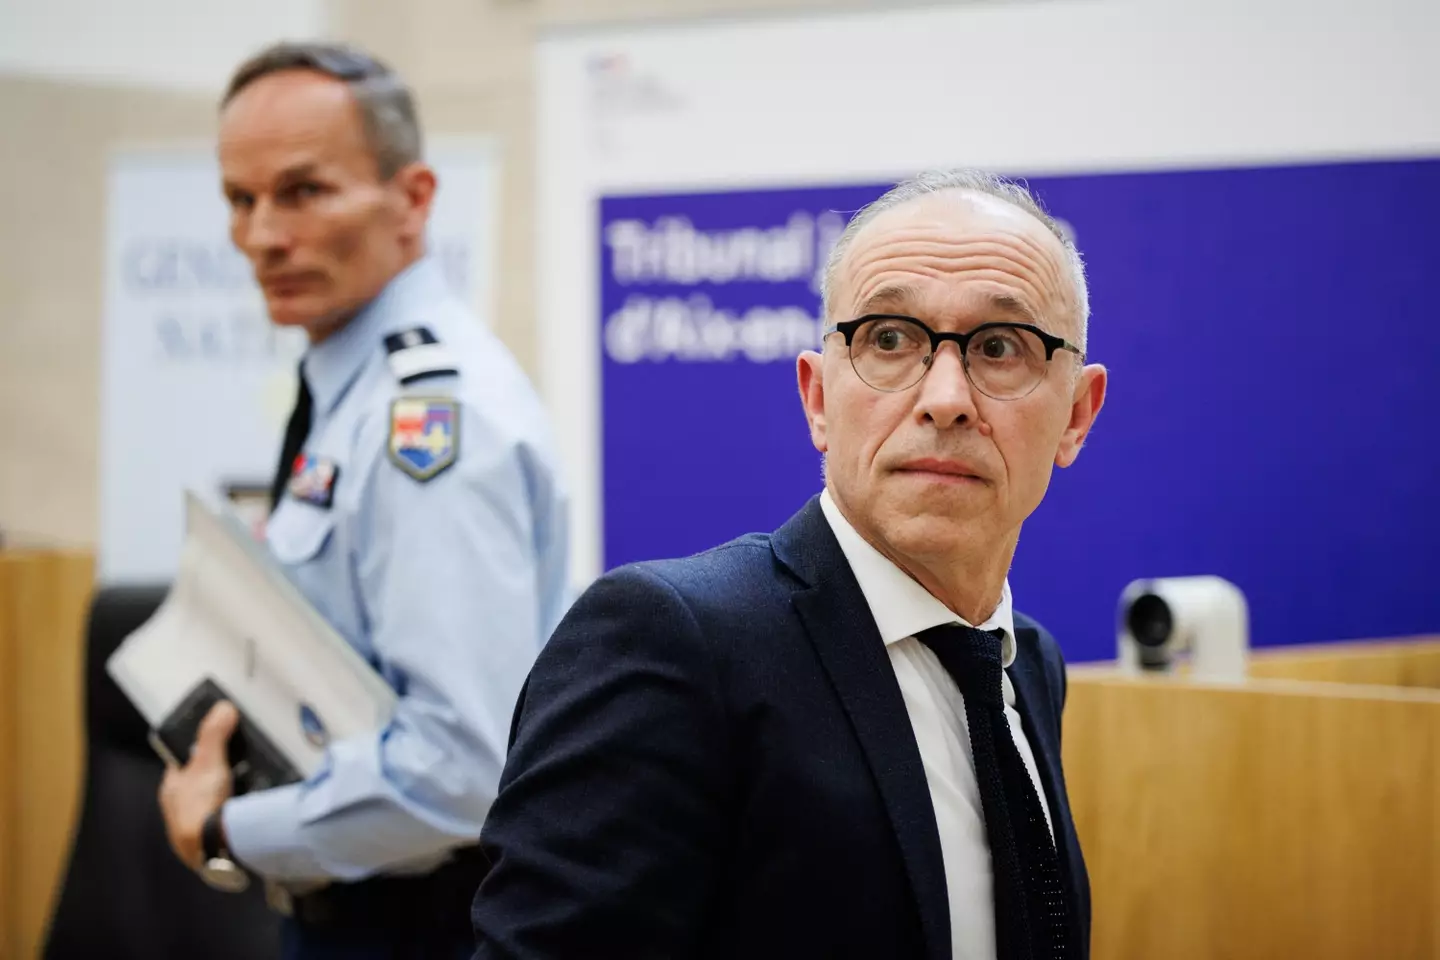 Jean-Luc Blachon is leading the investigation into the baffling case (CLEMENT MAHOUDEAU/AFP via Getty Images)